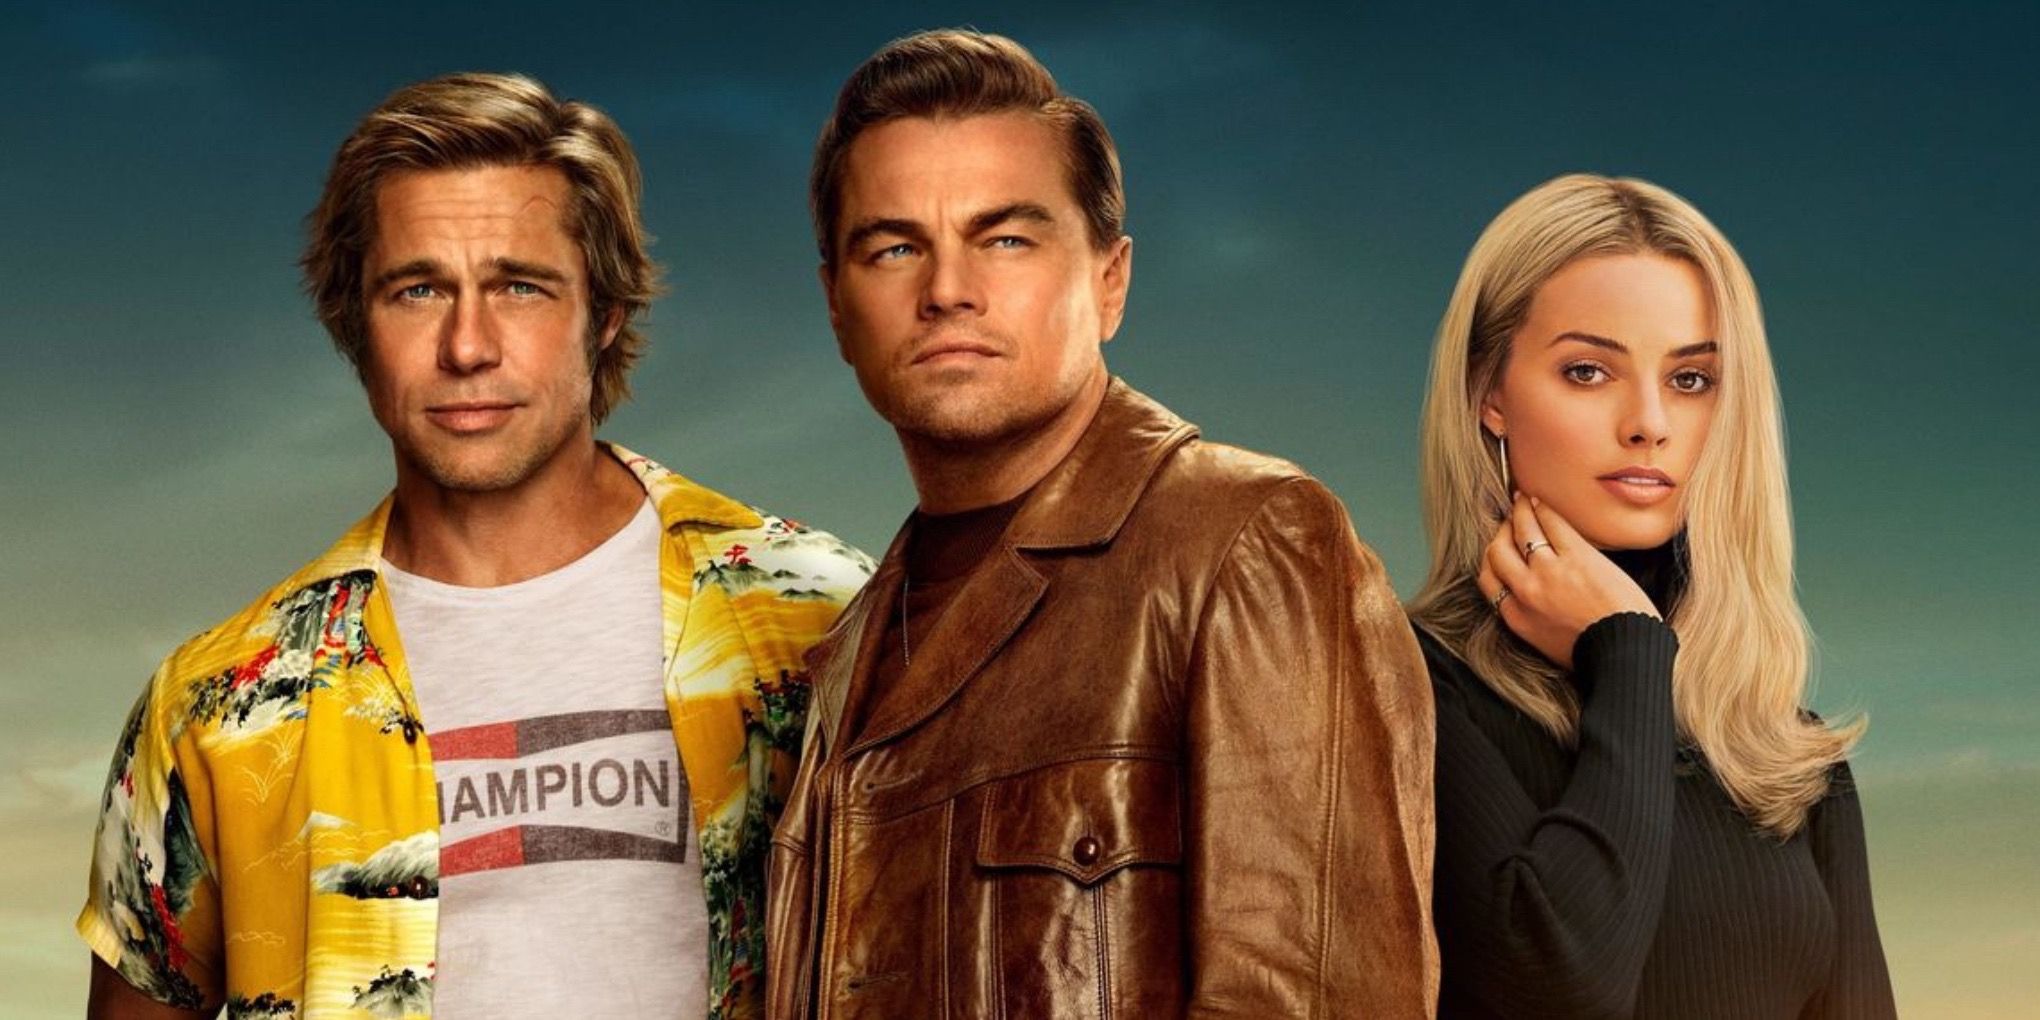 Brad Pitt, Leonardo DiCaprio and Margot Robbie in Once Upon a Time in Hollywood (2019)